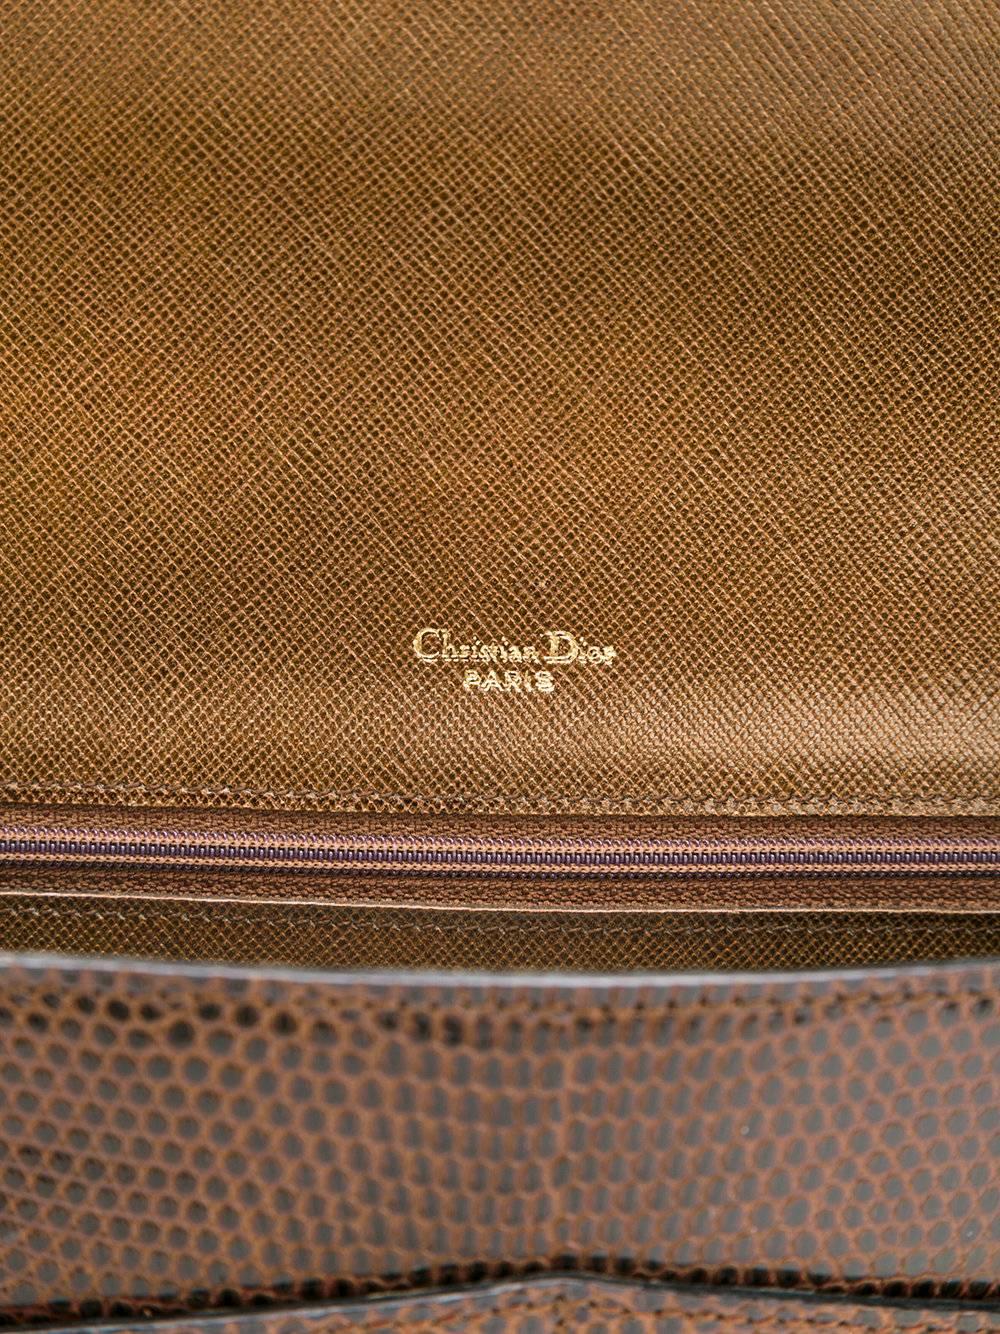 Women's Dior classic and collectable 70s brown lizard clutch bag